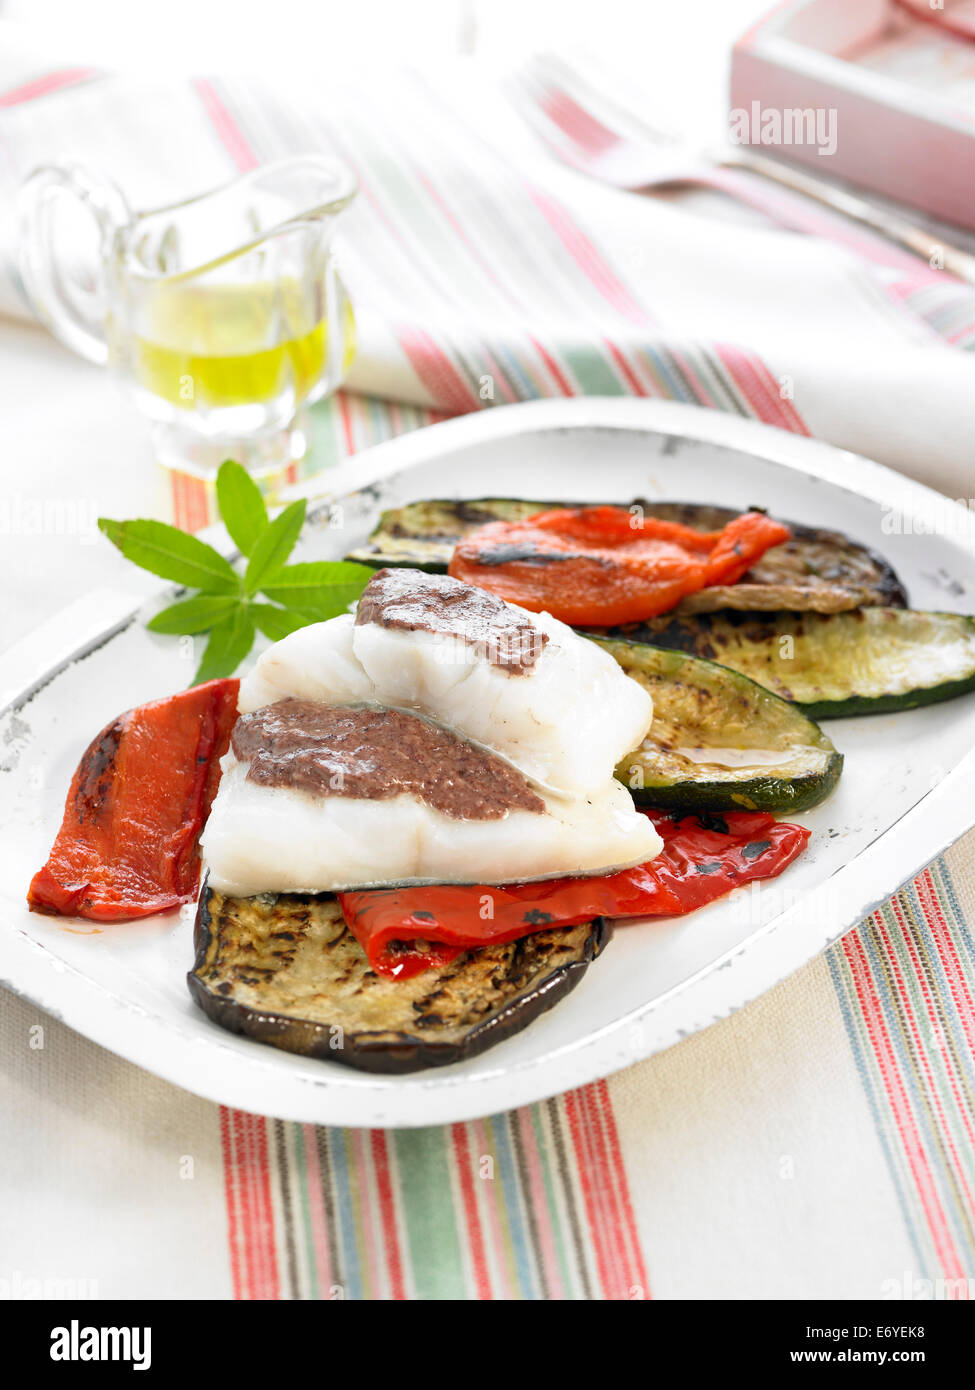 Salt cod with tapenade,grilled eggplants and red peppers Stock Photo